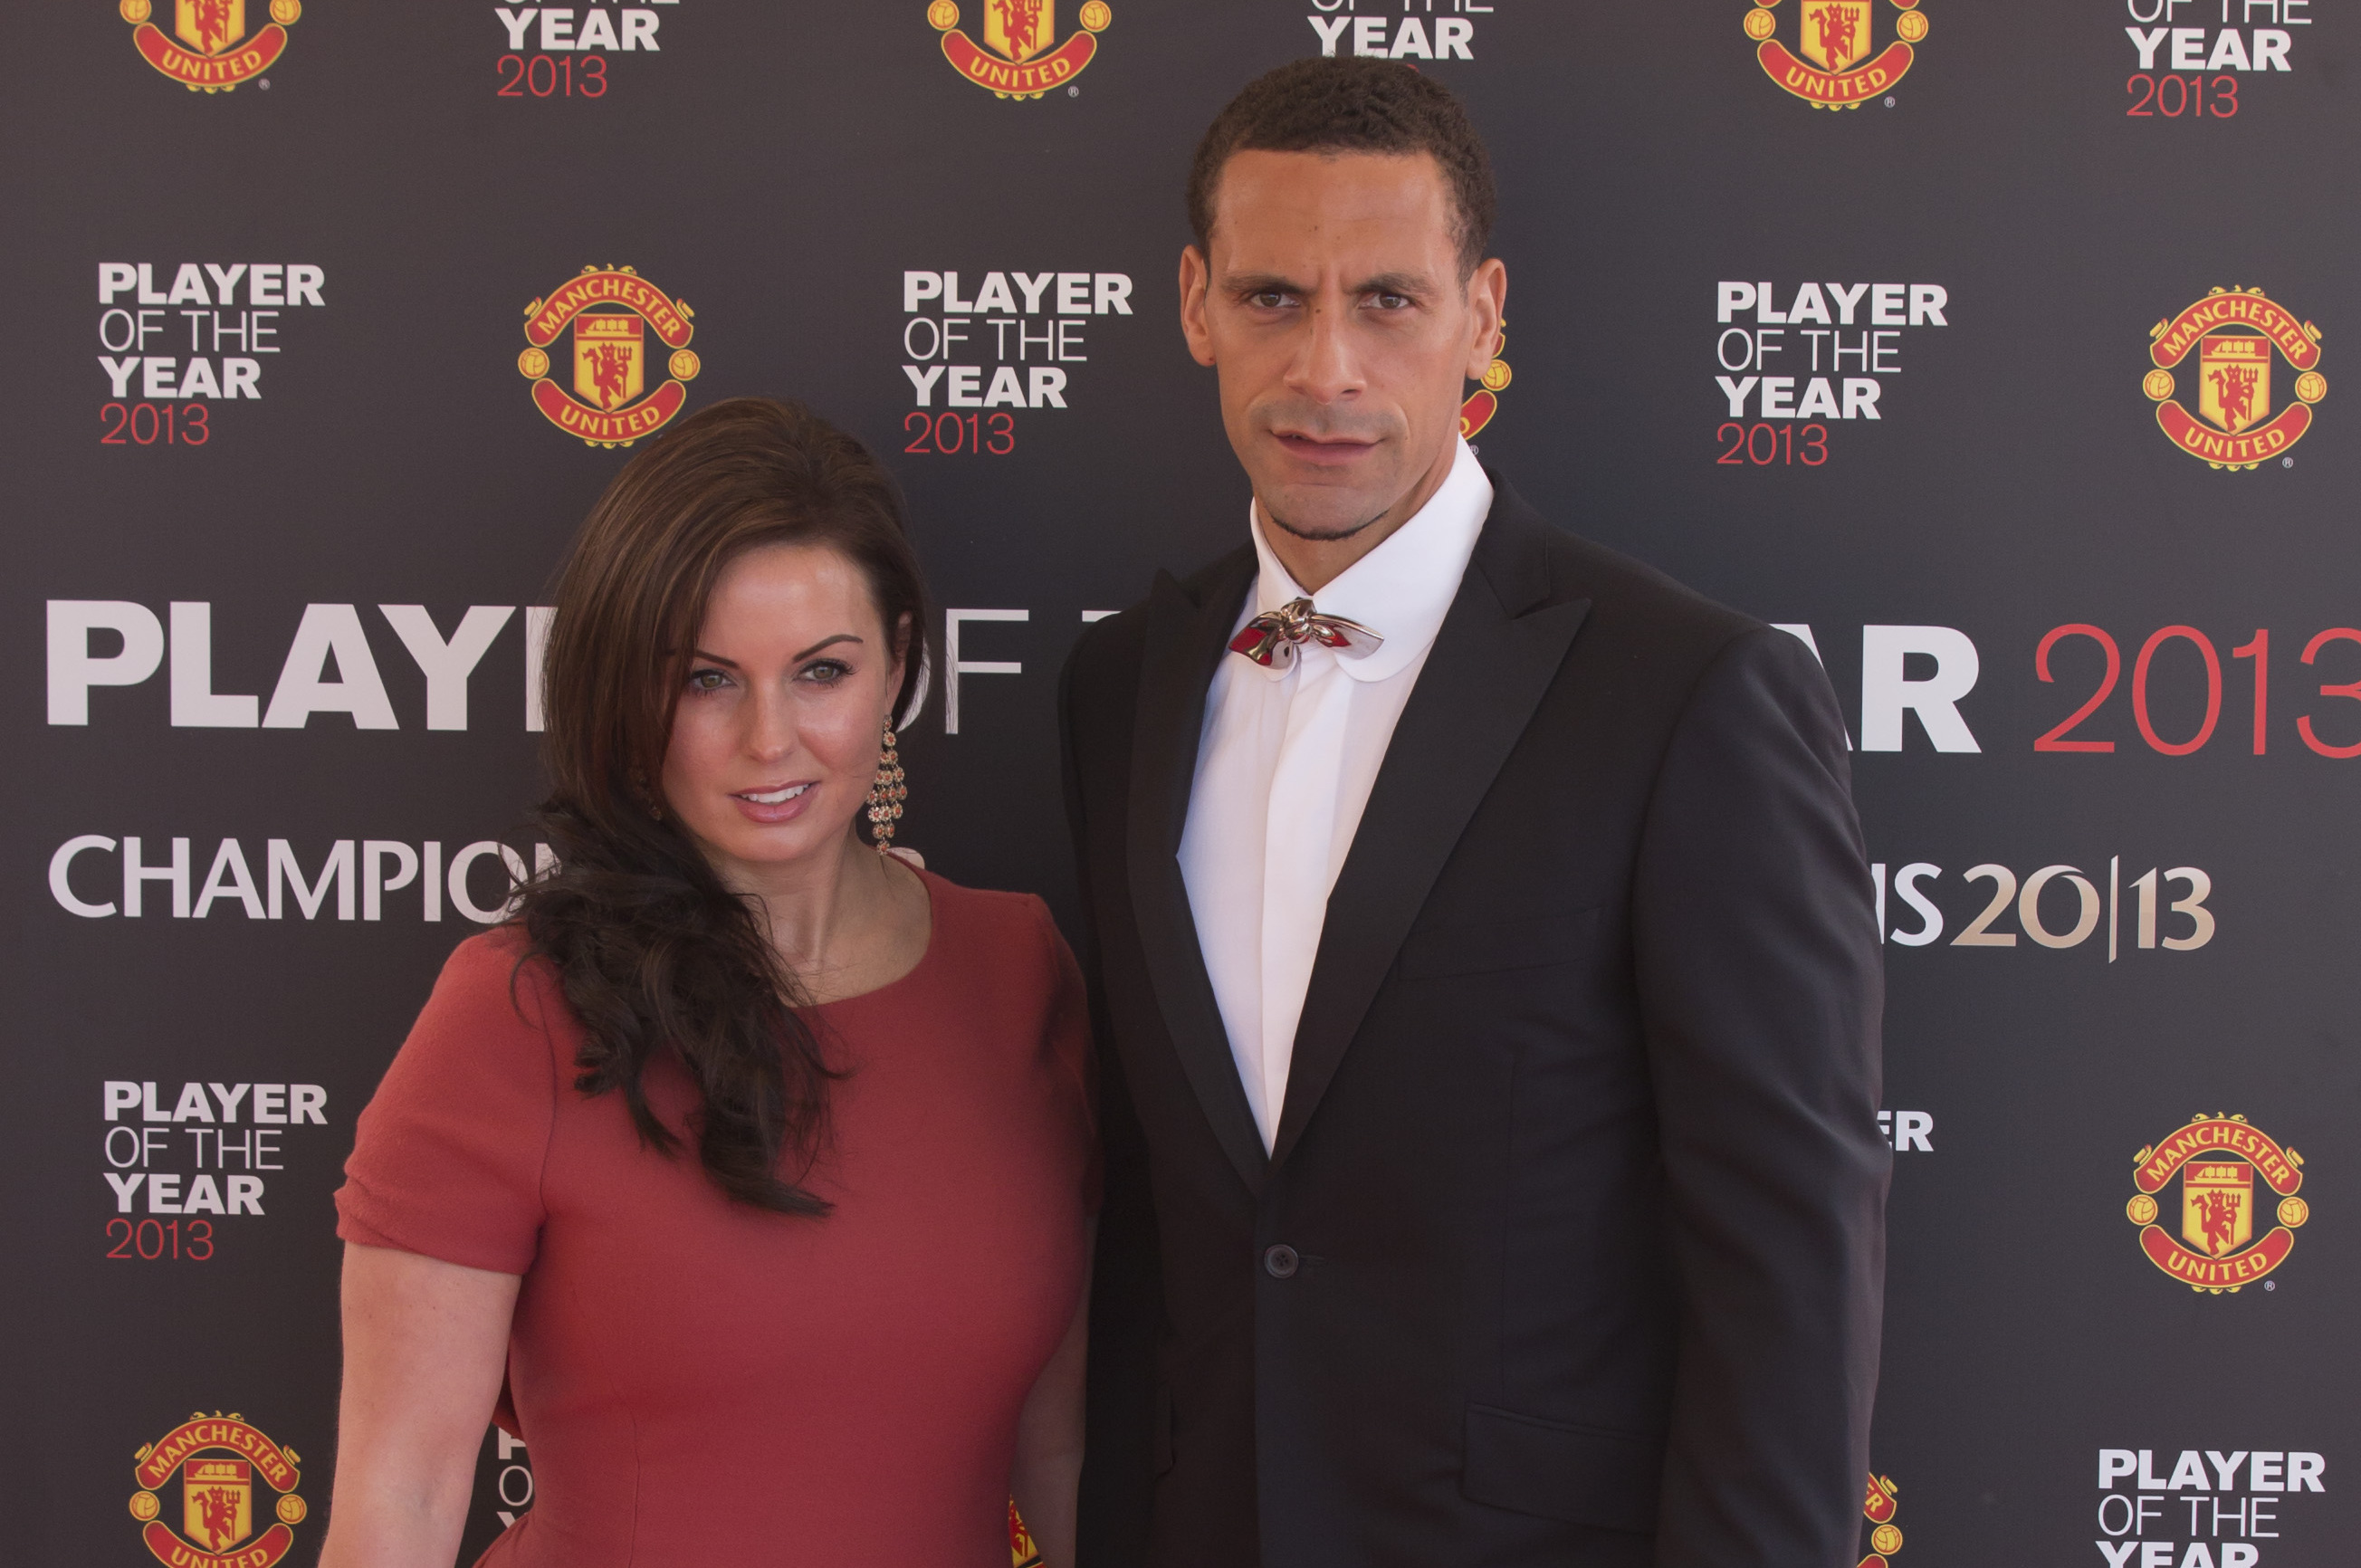 Rio Ferdinand S Wife Rebecca Dies At Age 34 After Battle With Breast Cancer Bleacher Report Latest News Videos And Highlights